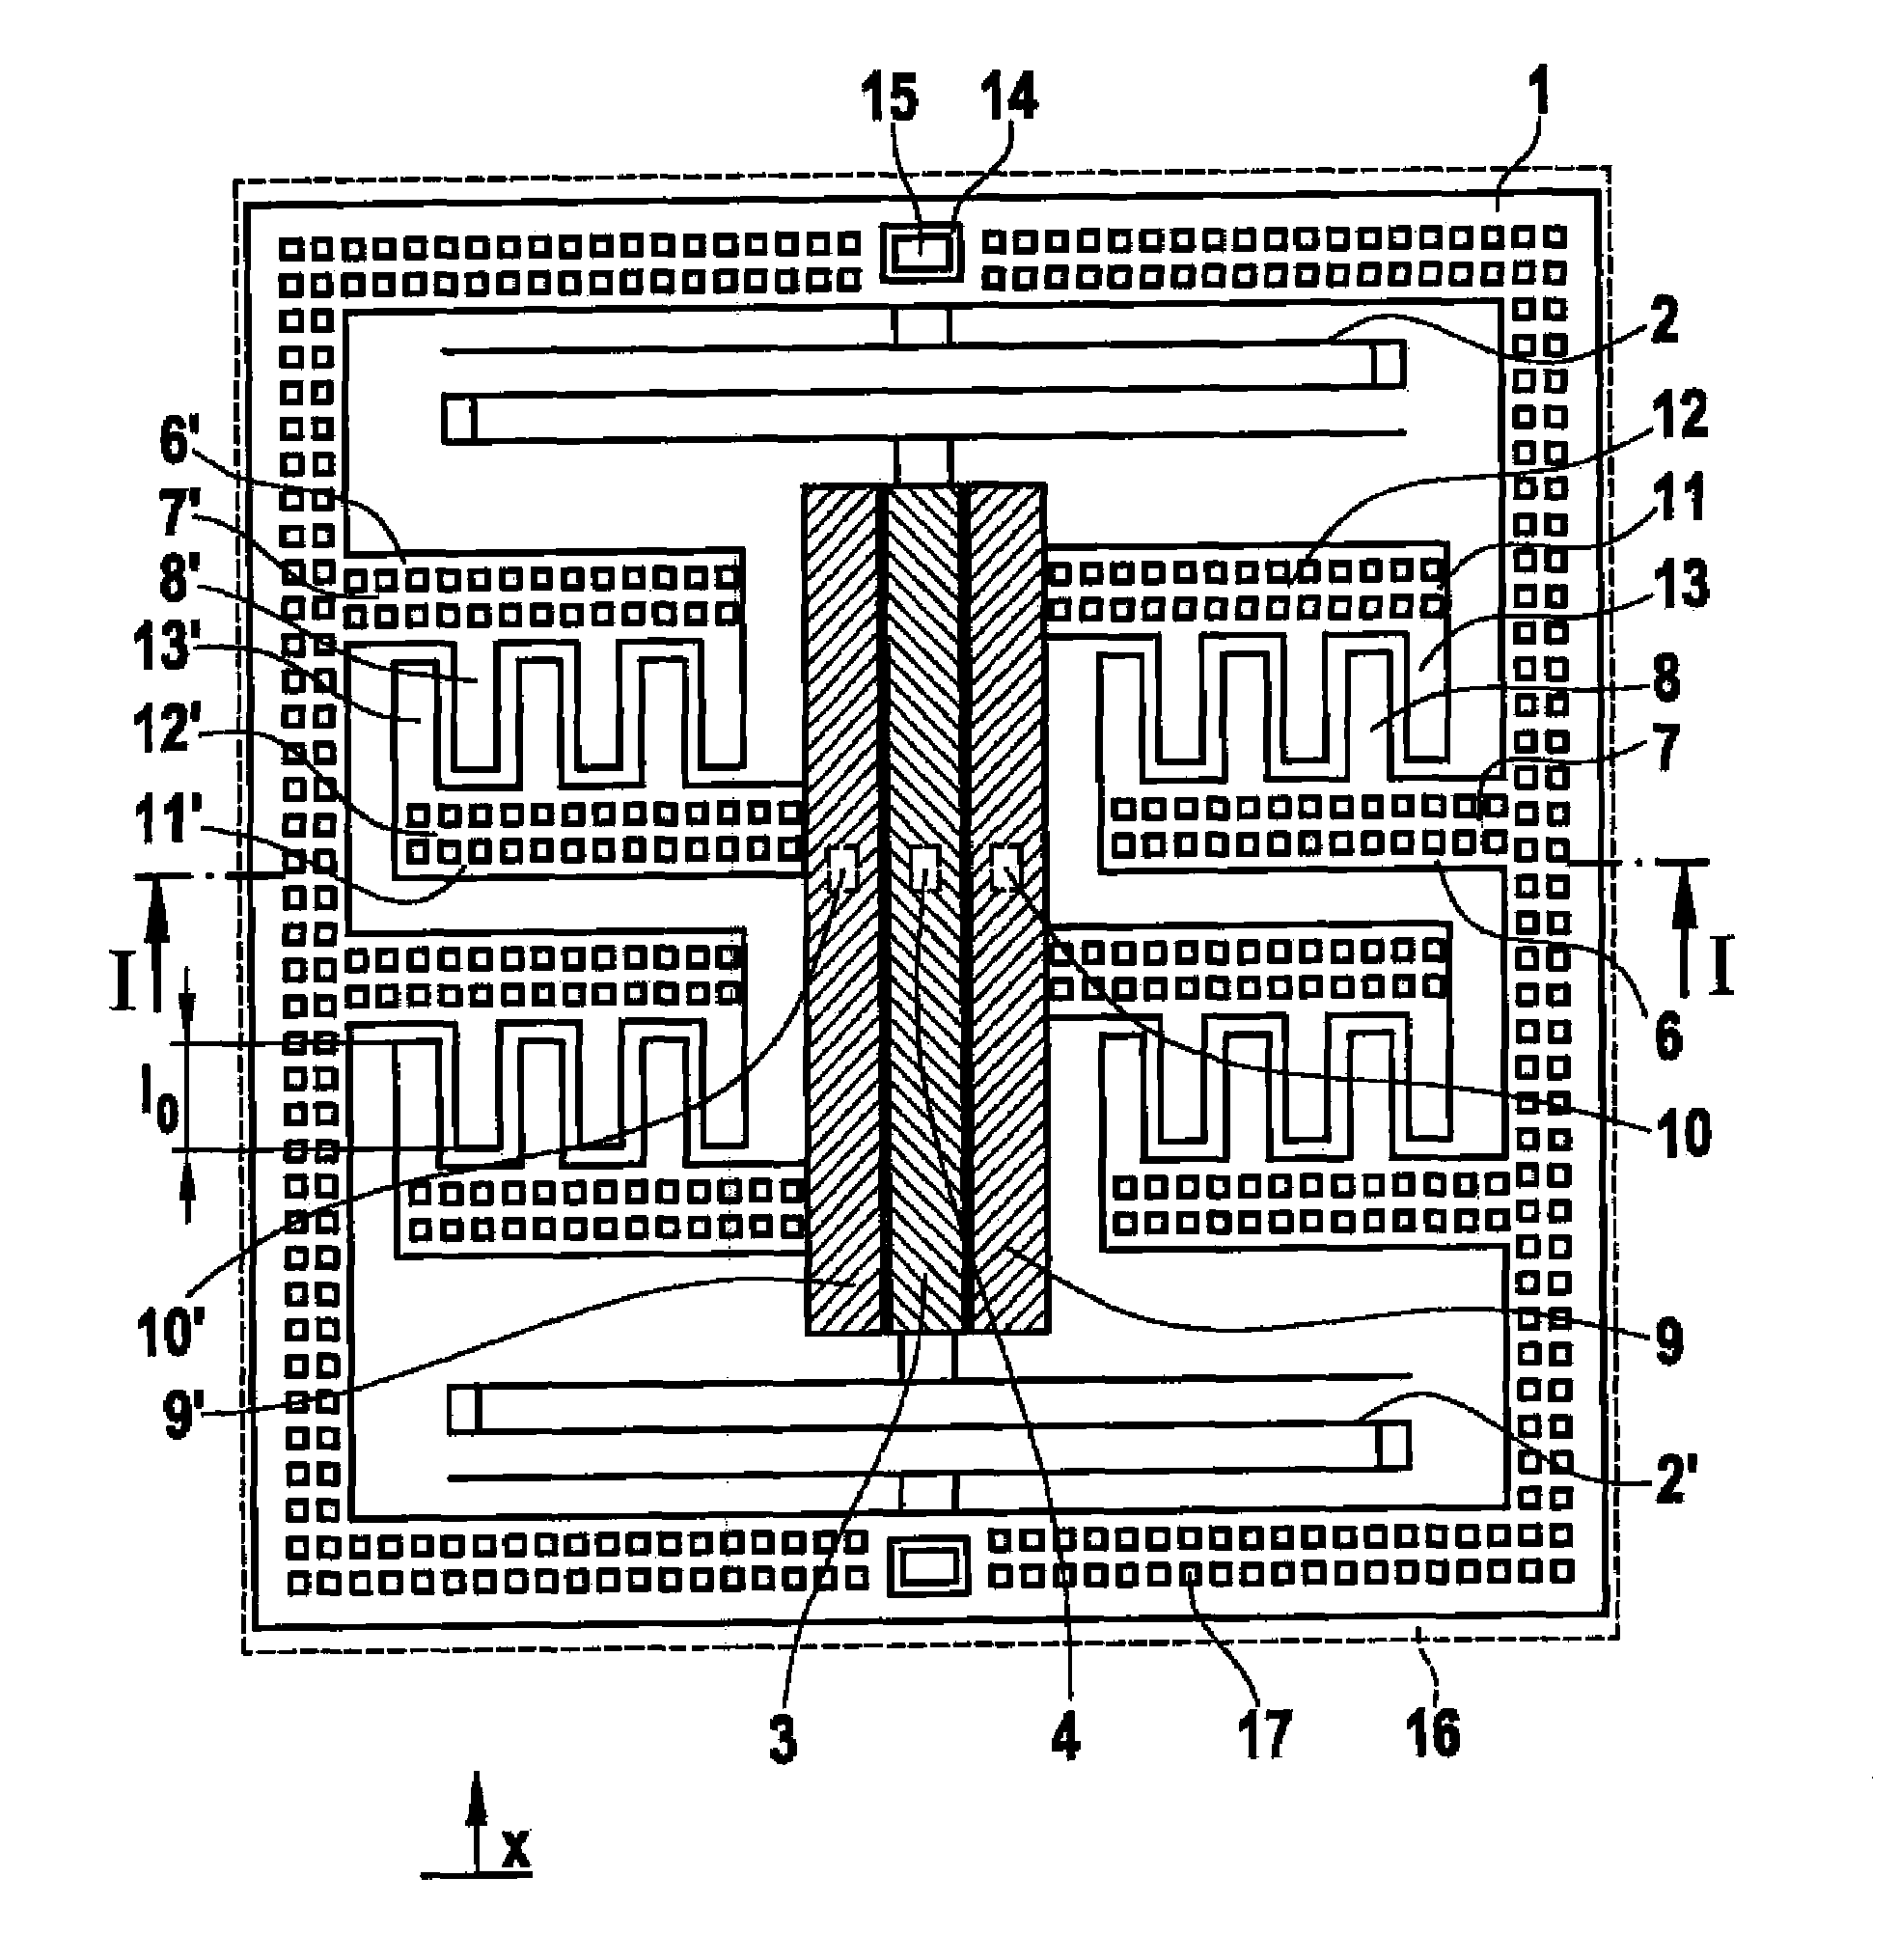 Acceleration sensor with comb-shaped electrodes